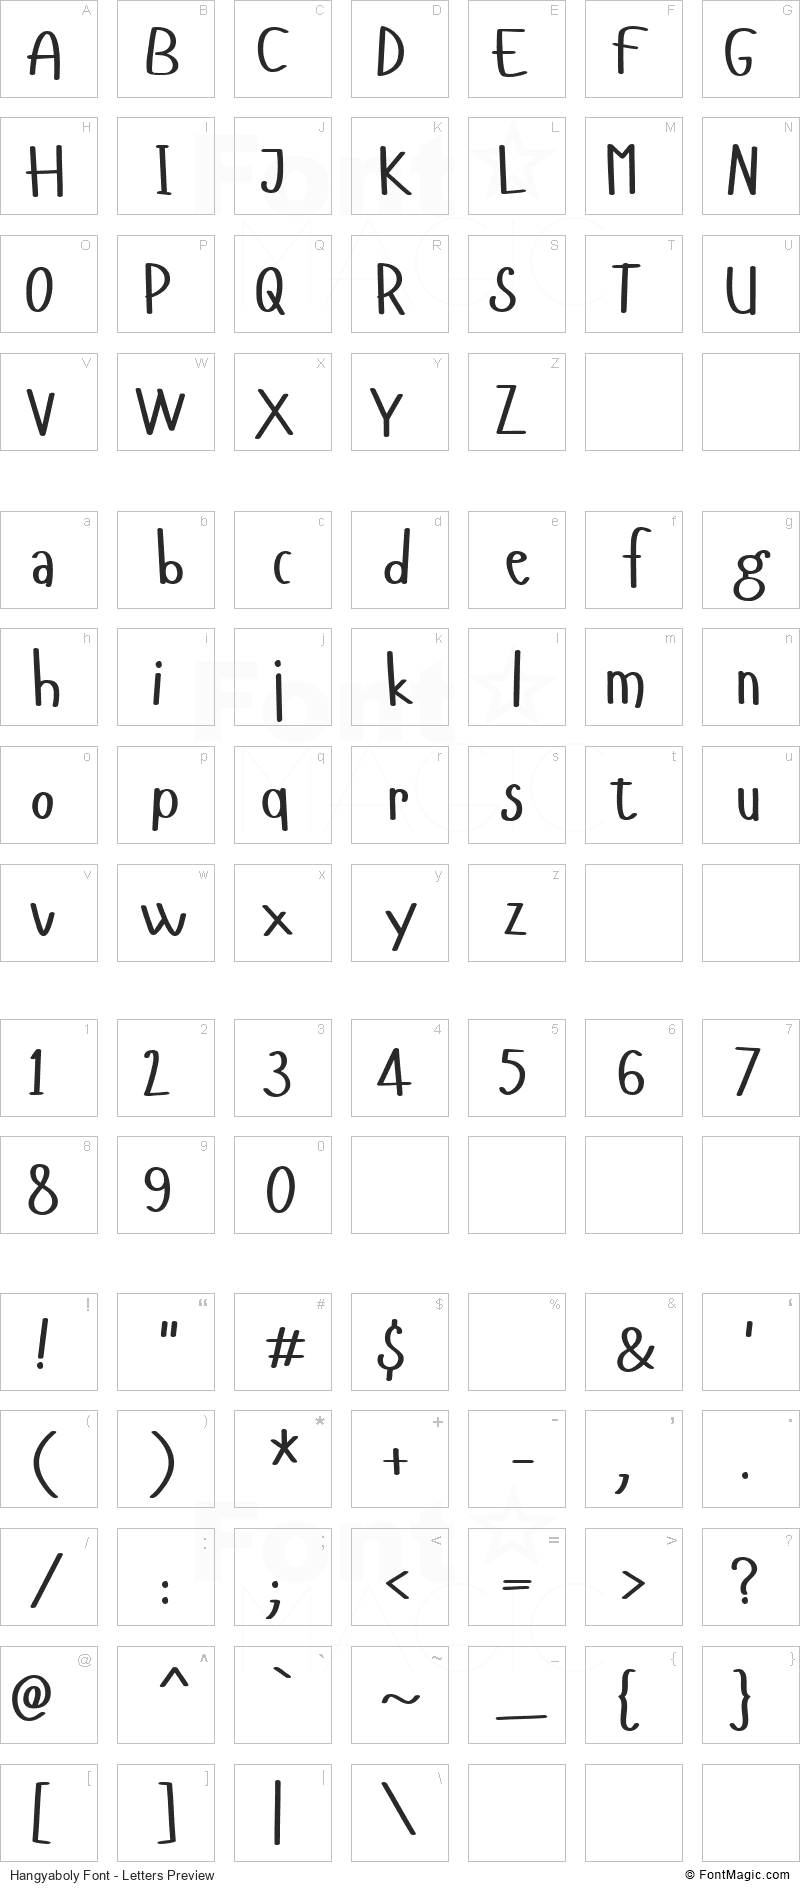 Hangyaboly Font - All Latters Preview Chart